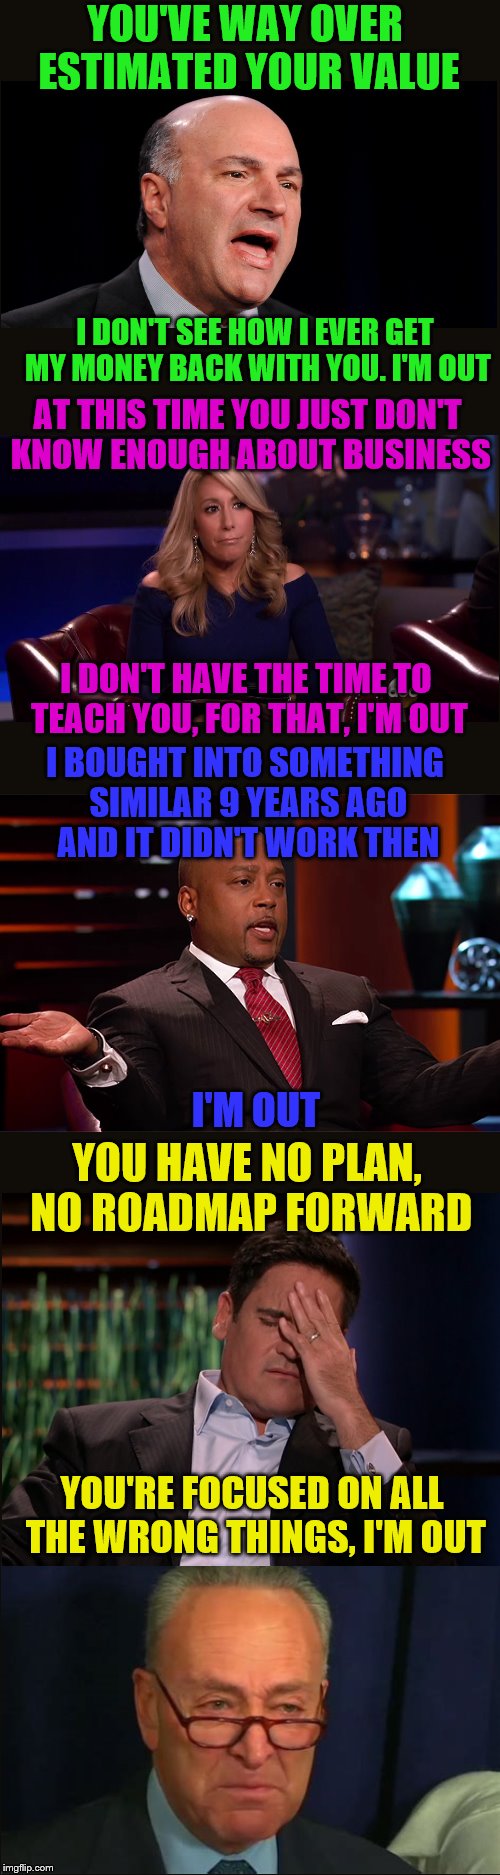 Shark Tank Fail | YOU'VE WAY OVER ESTIMATED YOUR VALUE; I DON'T SEE HOW I EVER GET MY MONEY BACK WITH YOU. I'M OUT; AT THIS TIME YOU JUST DON'T KNOW ENOUGH ABOUT BUSINESS; I DON'T HAVE THE TIME TO TEACH YOU, FOR THAT, I'M OUT; I BOUGHT INTO SOMETHING SIMILAR 9 YEARS AGO AND IT DIDN'T WORK THEN; I'M OUT; YOU HAVE NO PLAN, NO ROADMAP FORWARD; YOU'RE FOCUSED ON ALL THE WRONG THINGS, I'M OUT | image tagged in memes,shark tank,crying chuck,sharks | made w/ Imgflip meme maker